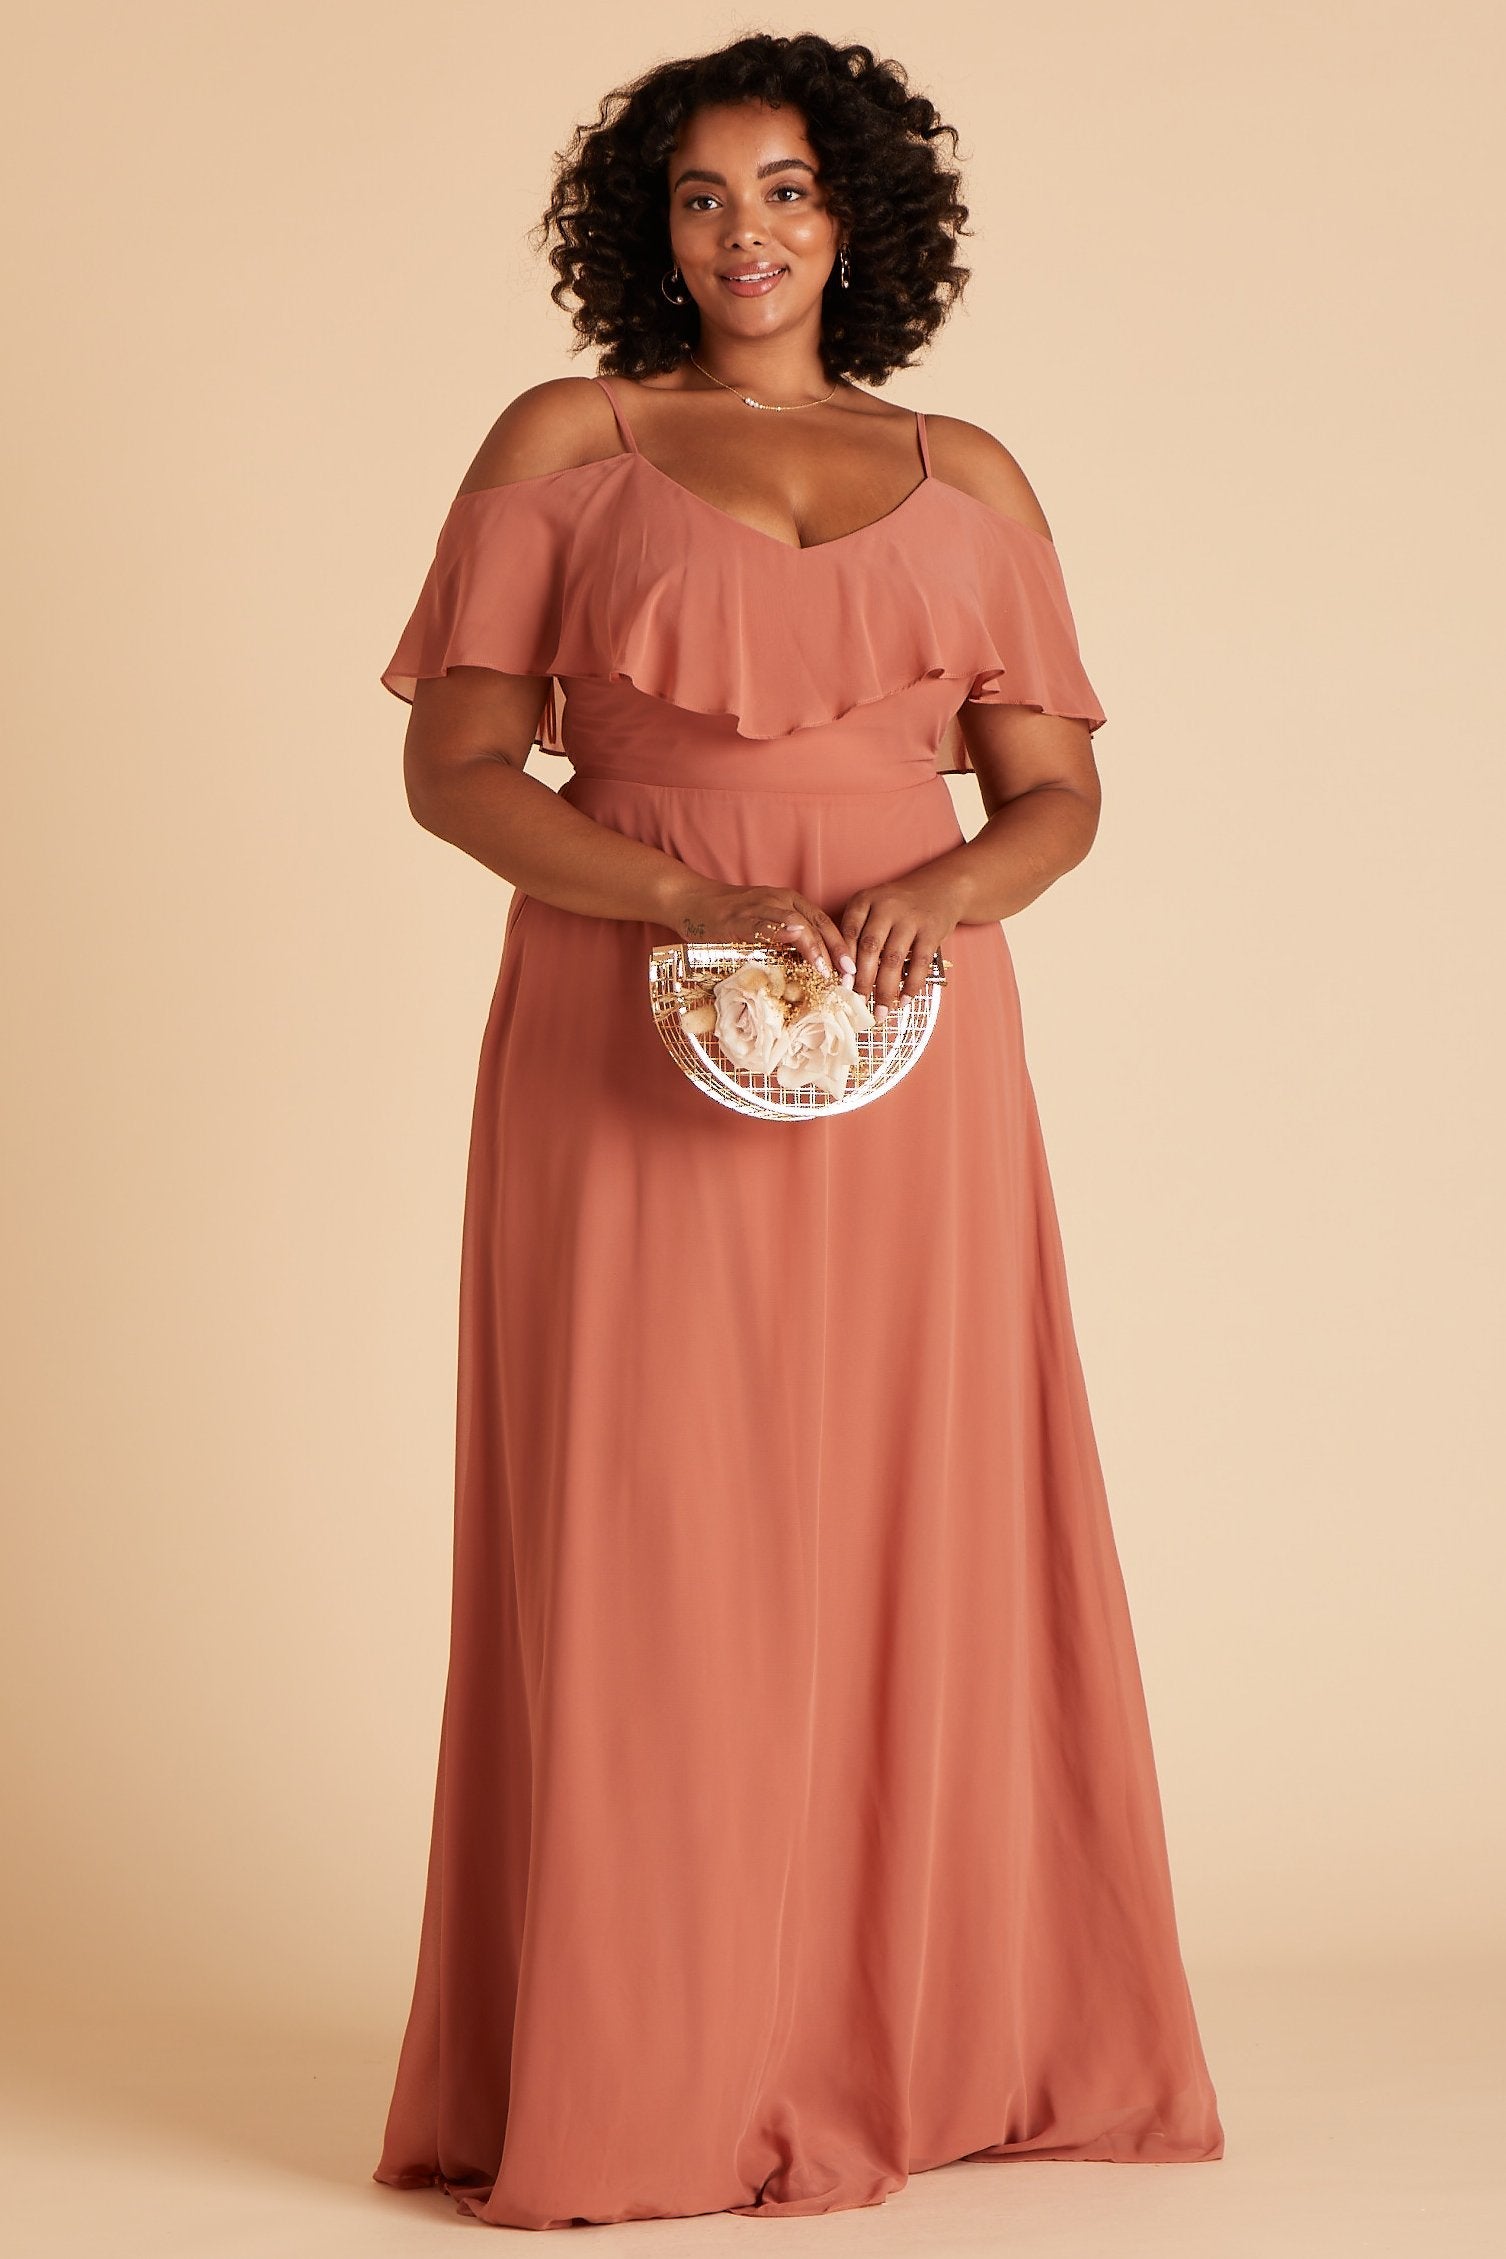 Jane convertible plus size bridesmaid dress in terracotta orange chiffon by Birdy Grey, front view